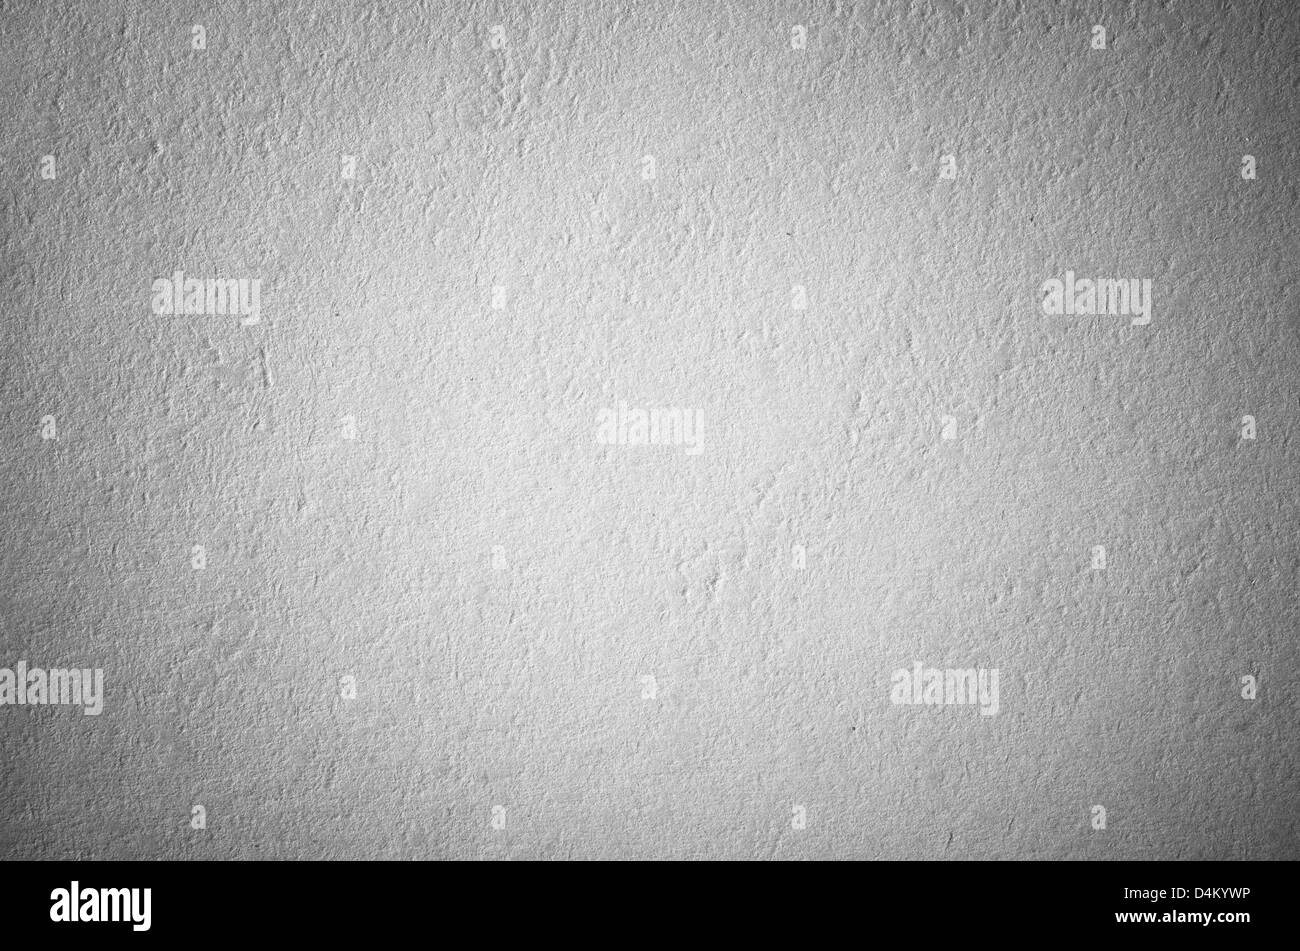 grunge paper texture and background Stock Photo